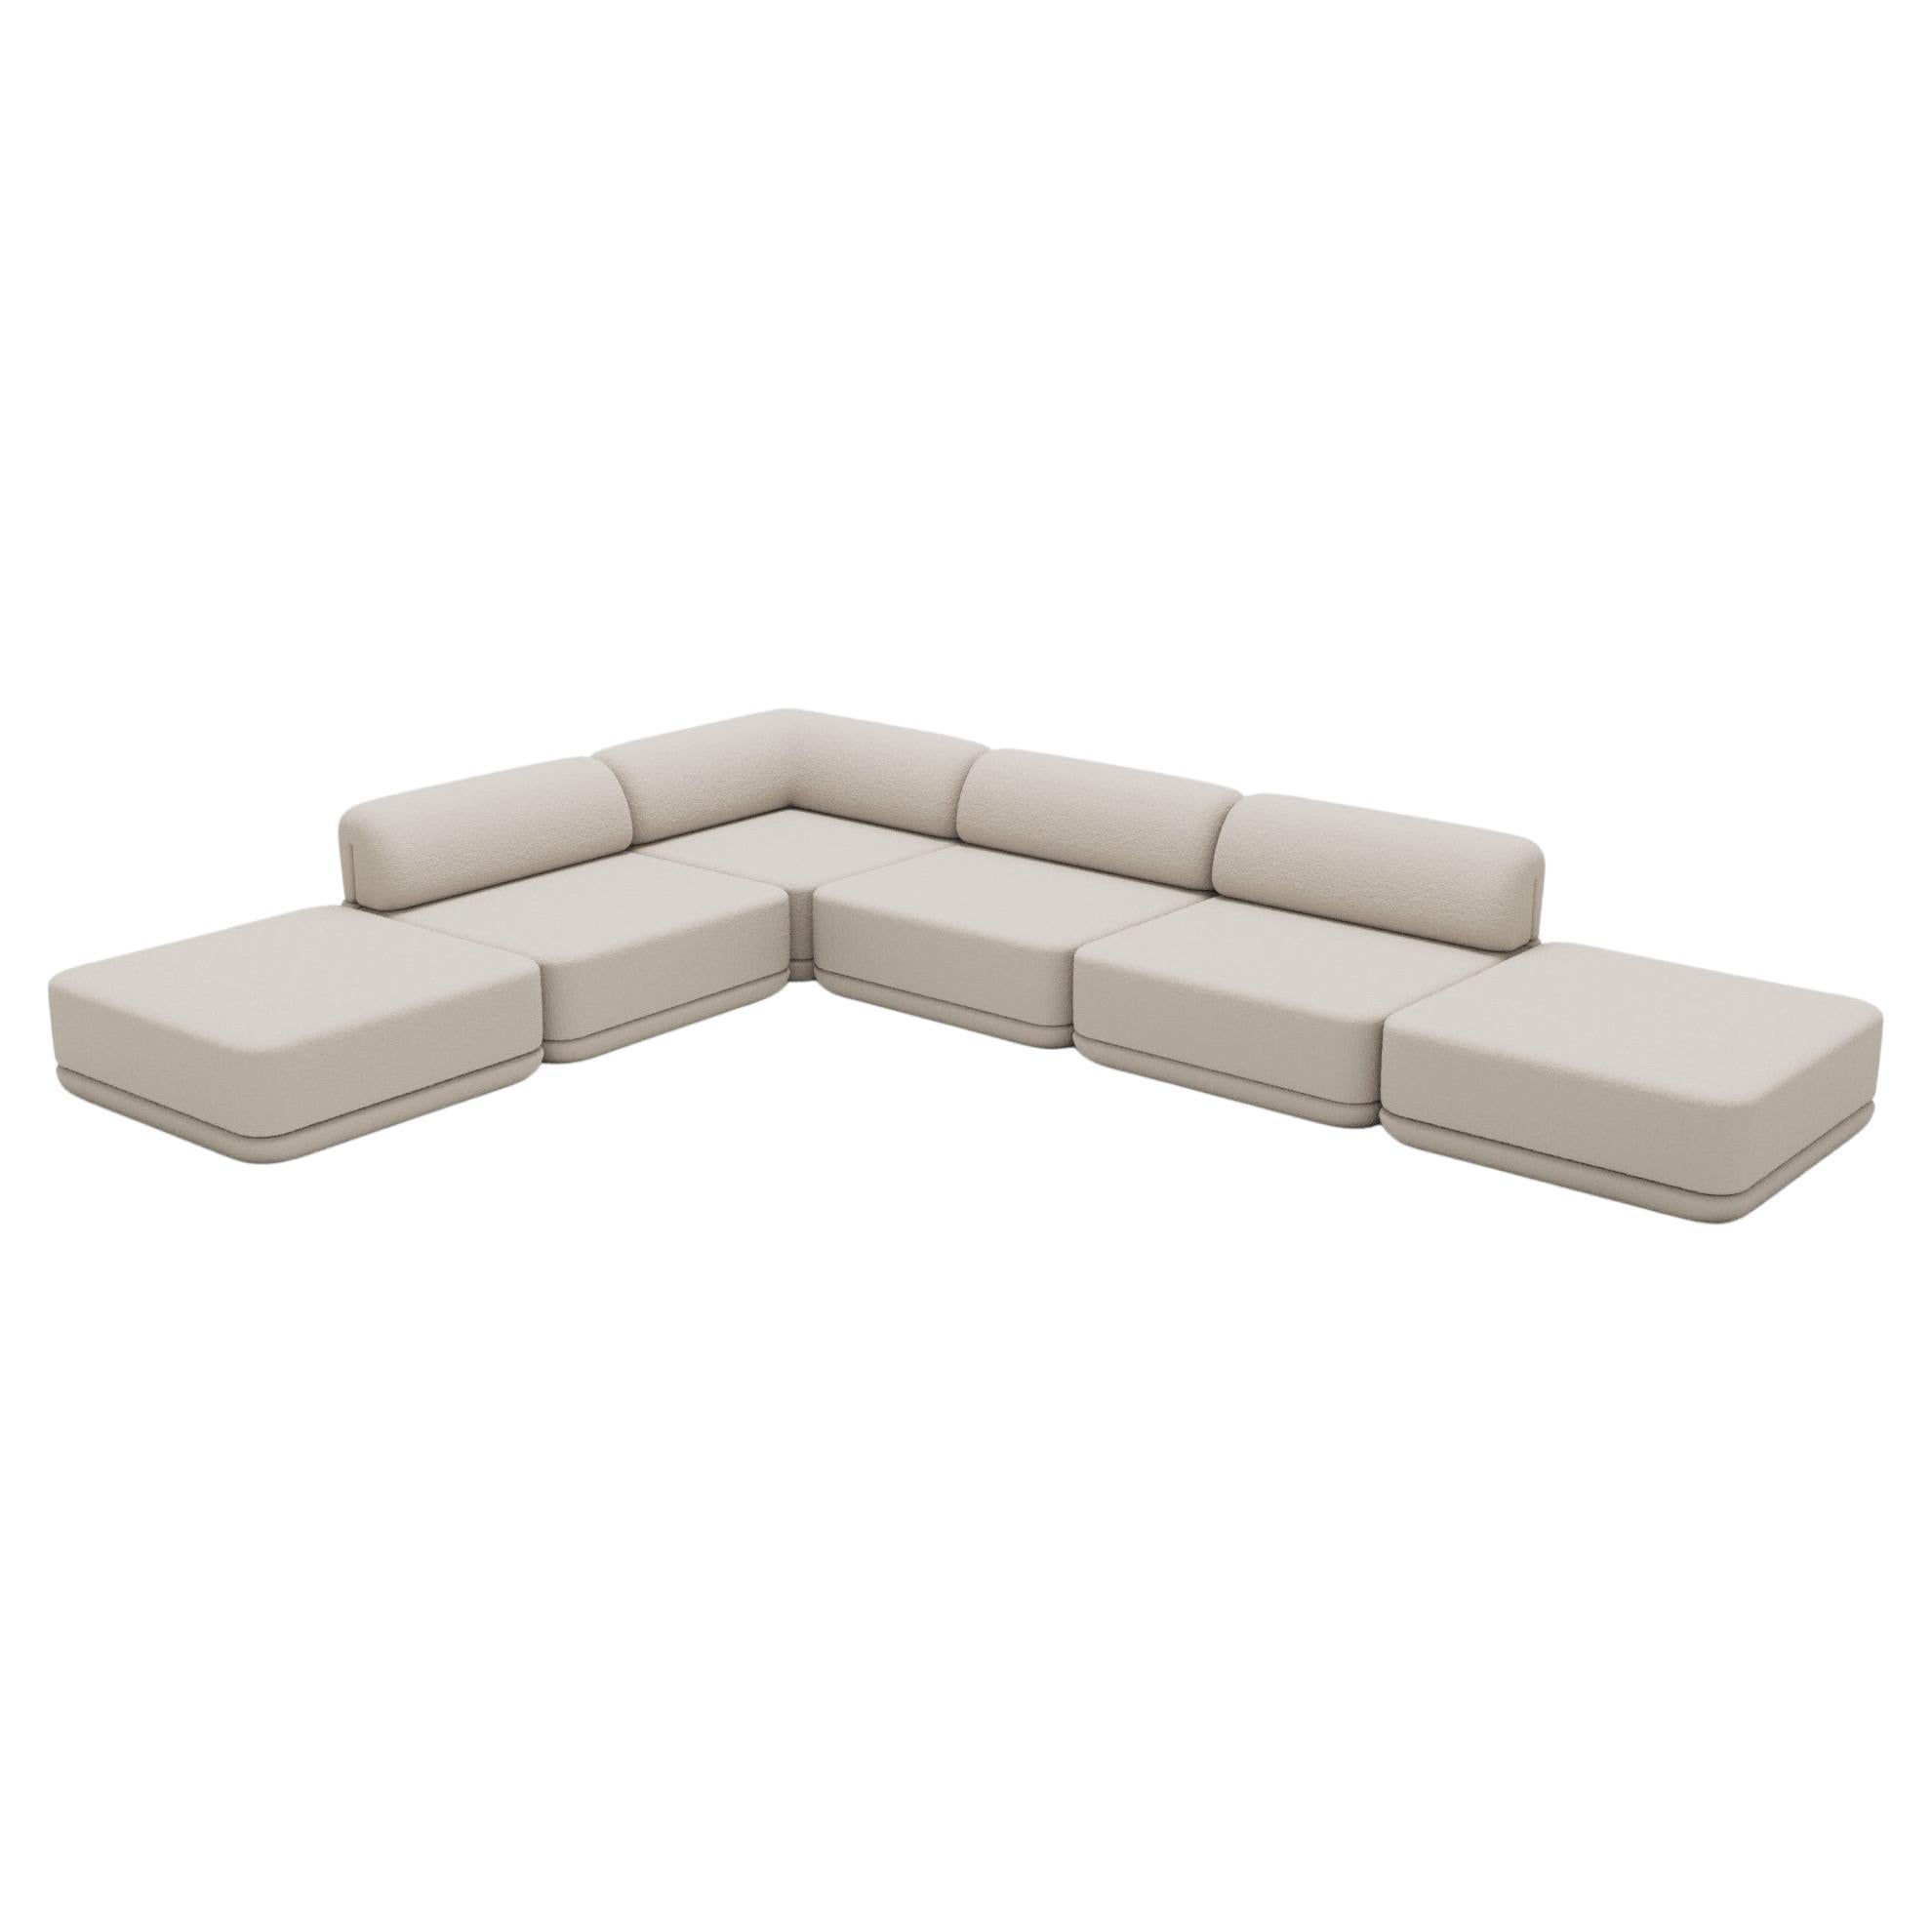 The Cube Sofa - Eck Lounge Ottoman Mix Sectional